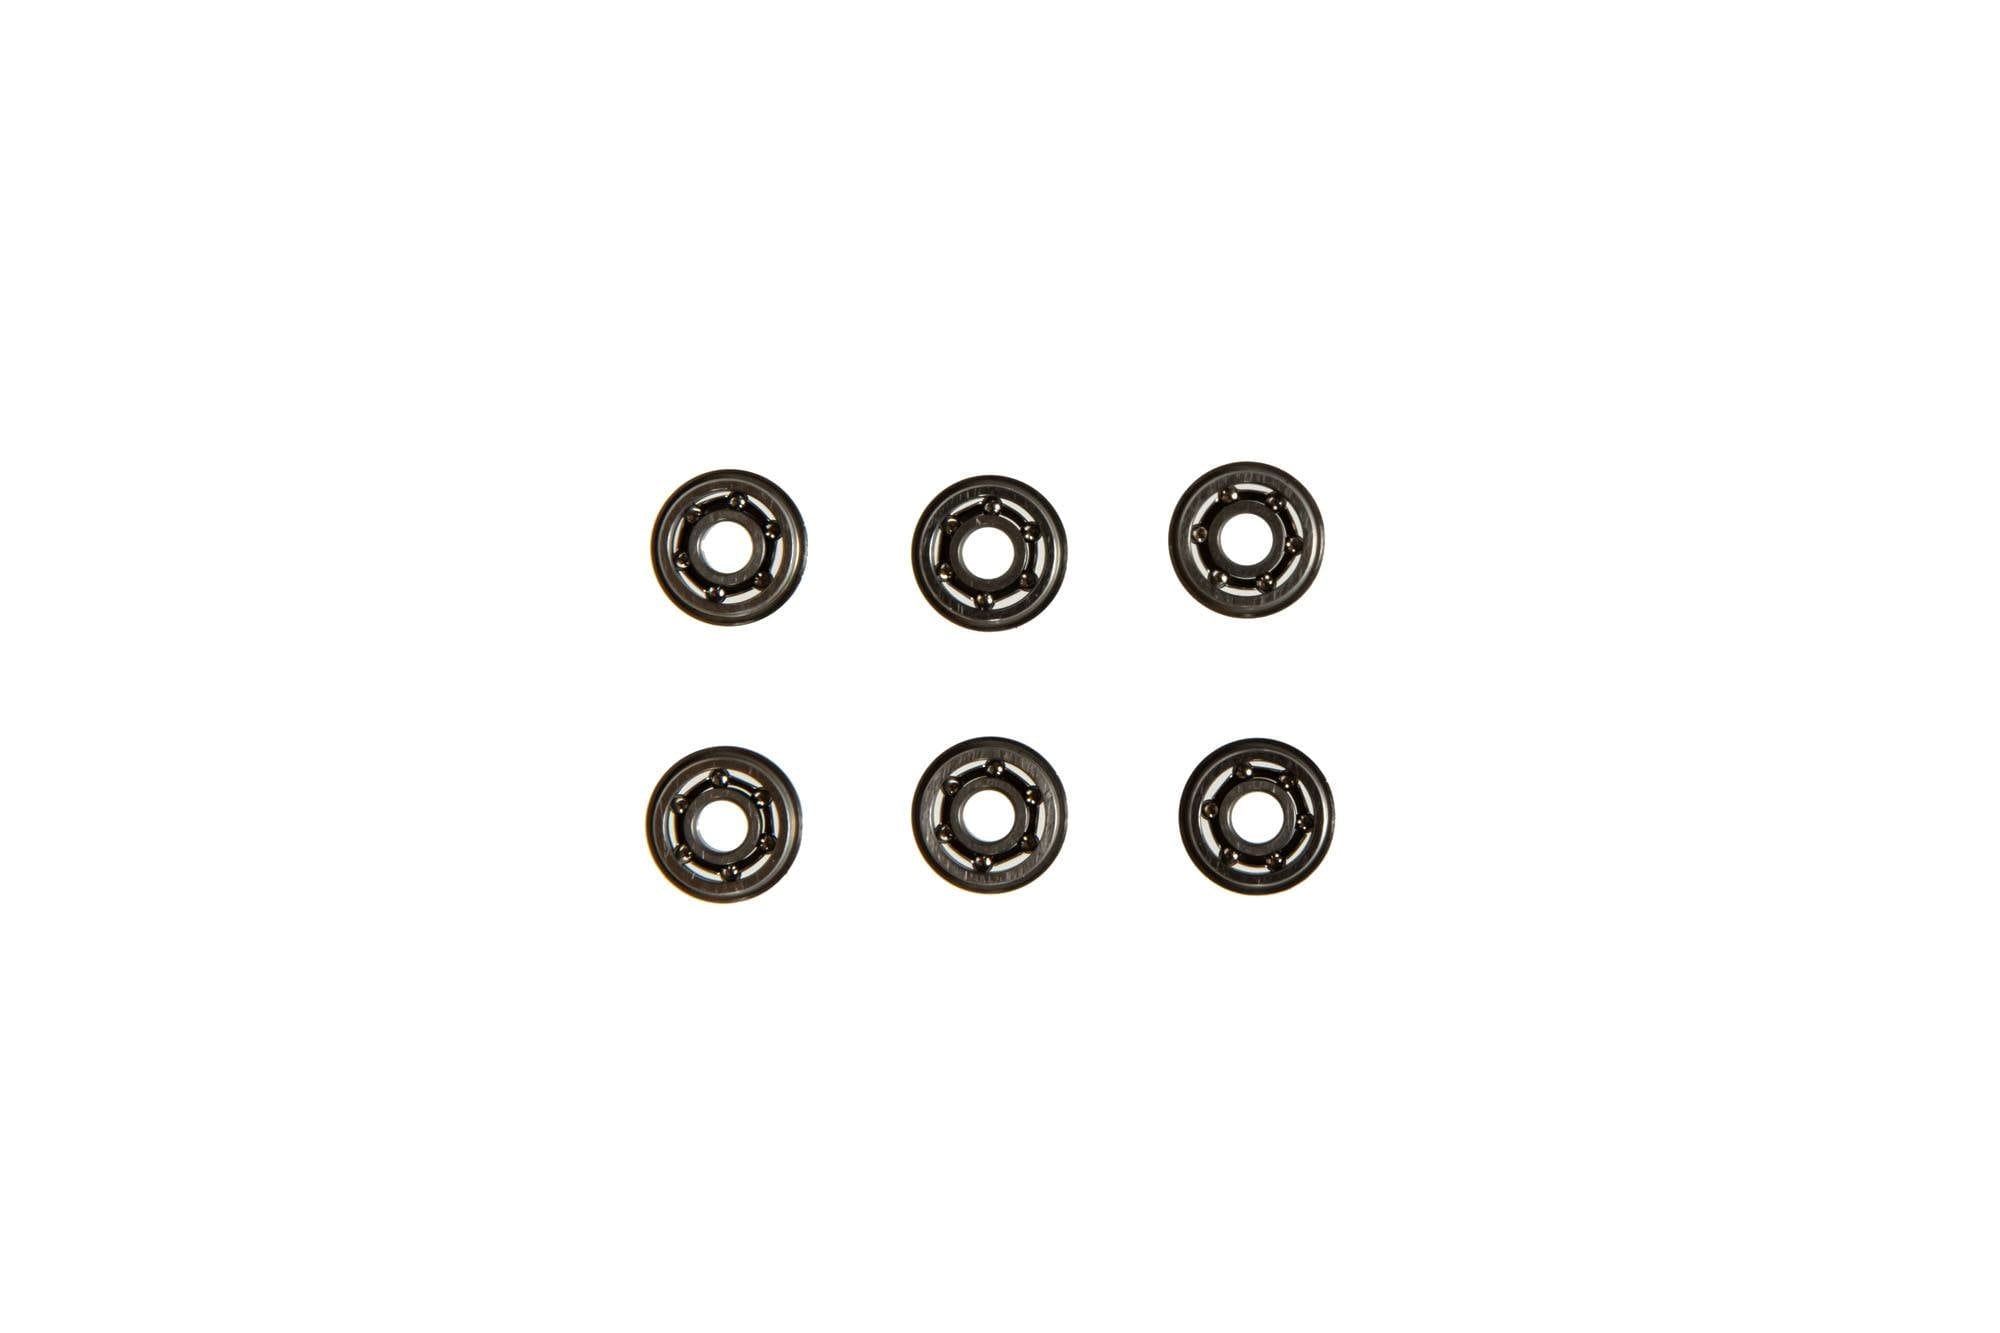 8mm Bearing Set for Specna Arms ONE